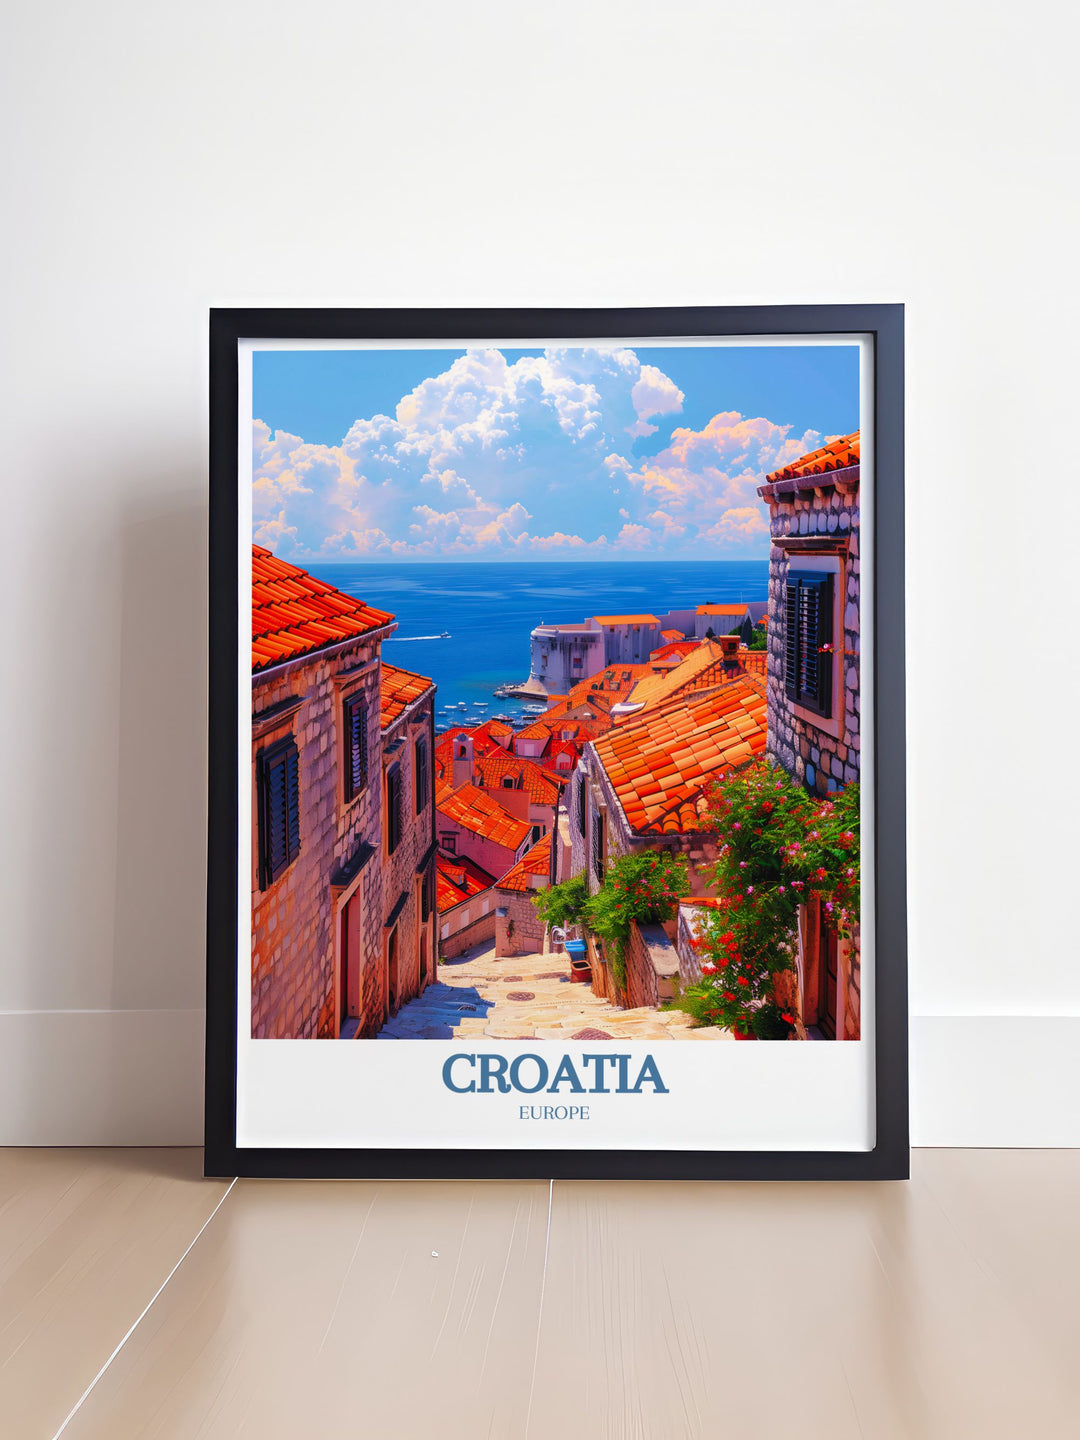 Highlighting the scenic vistas of Split and the vibrant life of the Adriatic Sea, this travel poster is perfect for those who appreciate the rich history and scenic richness of Croatia.